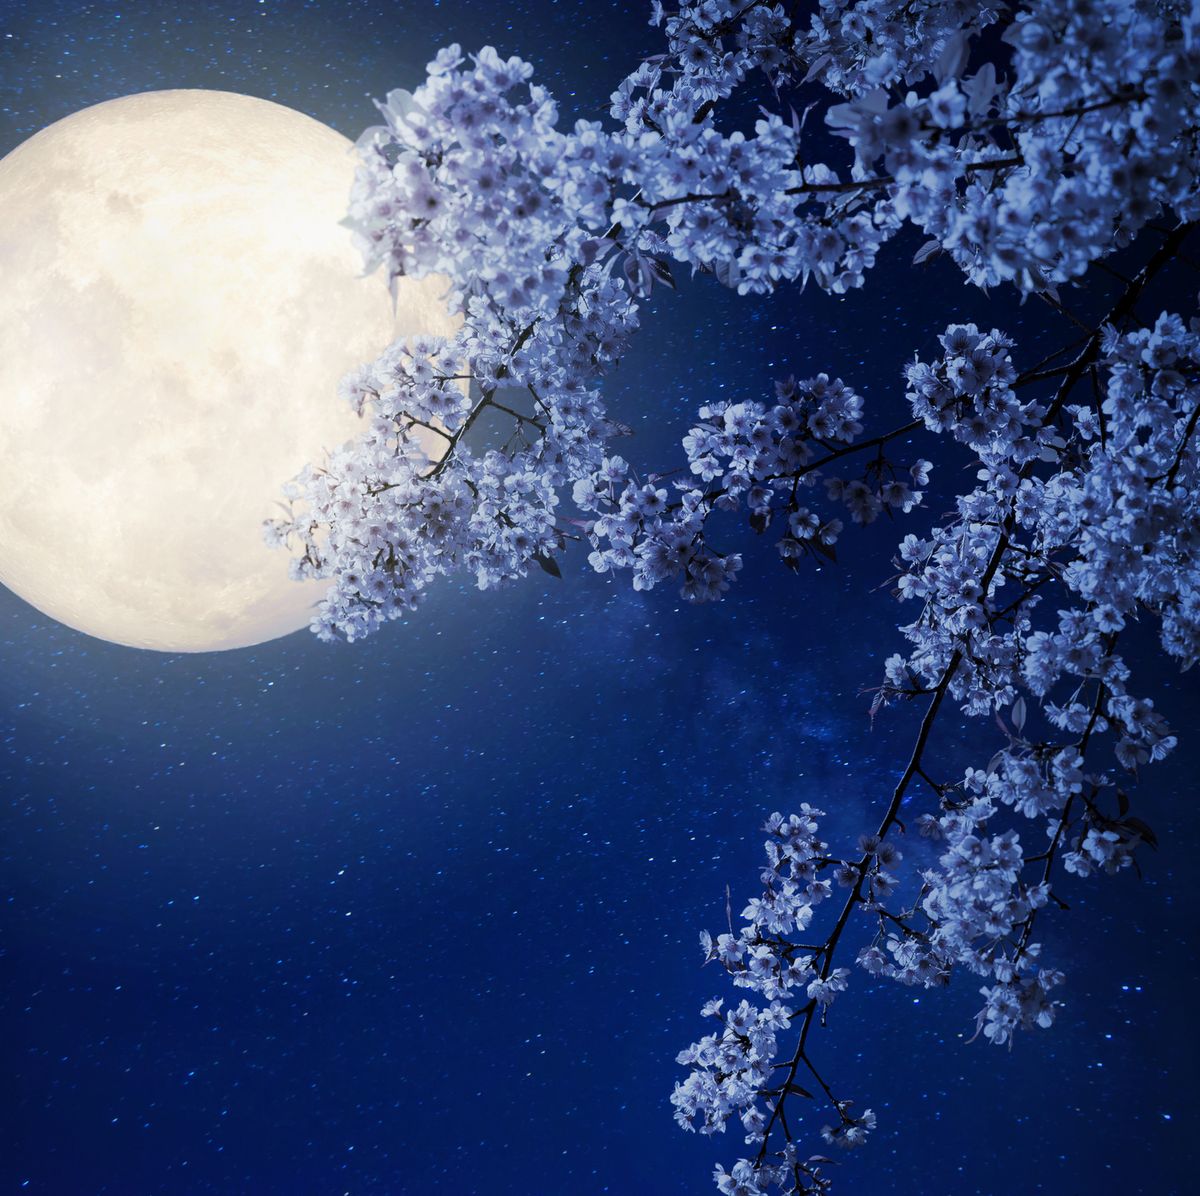 Full Flower Moon to bloom in night sky during 1st weekend of May